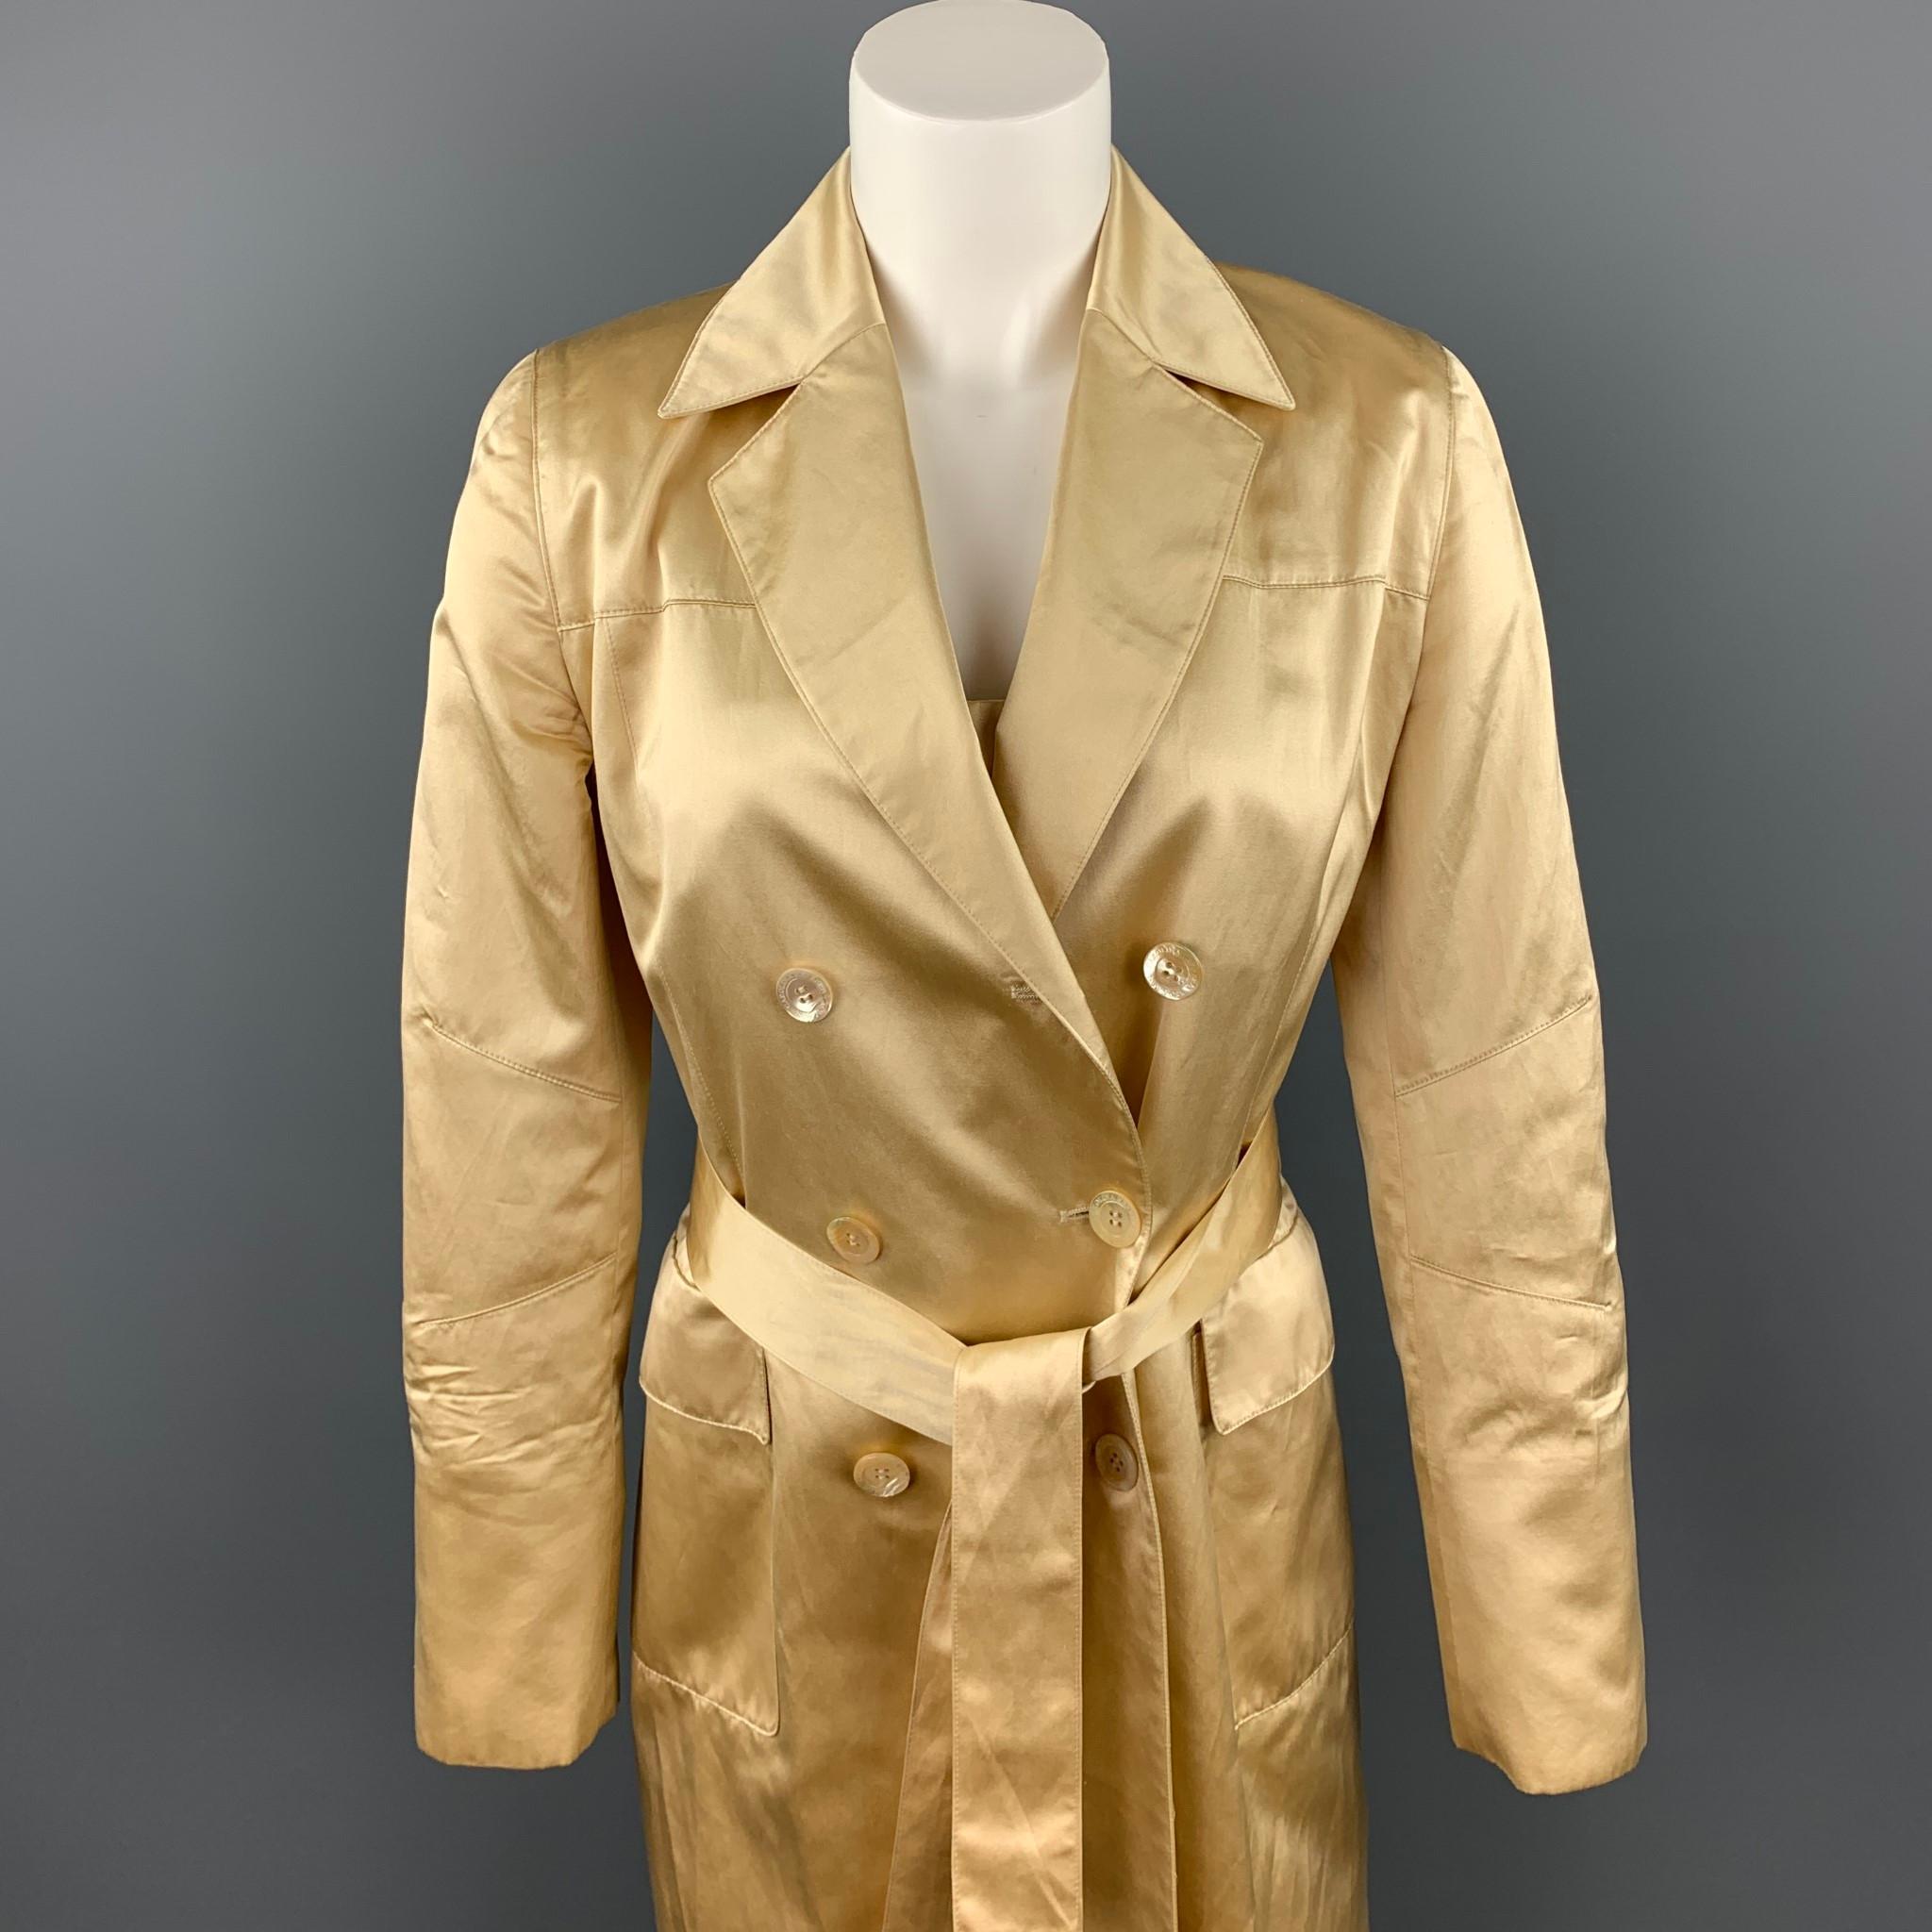 CAROLINA HERRERA 2 PC dress set comes in a gold satin silk featuring a sheath style, spaghetti straps, belted, and zip up closure. Also, includes a matching belted coat with a notch lapel style, flap pockets, and a double breasted closure. Minor